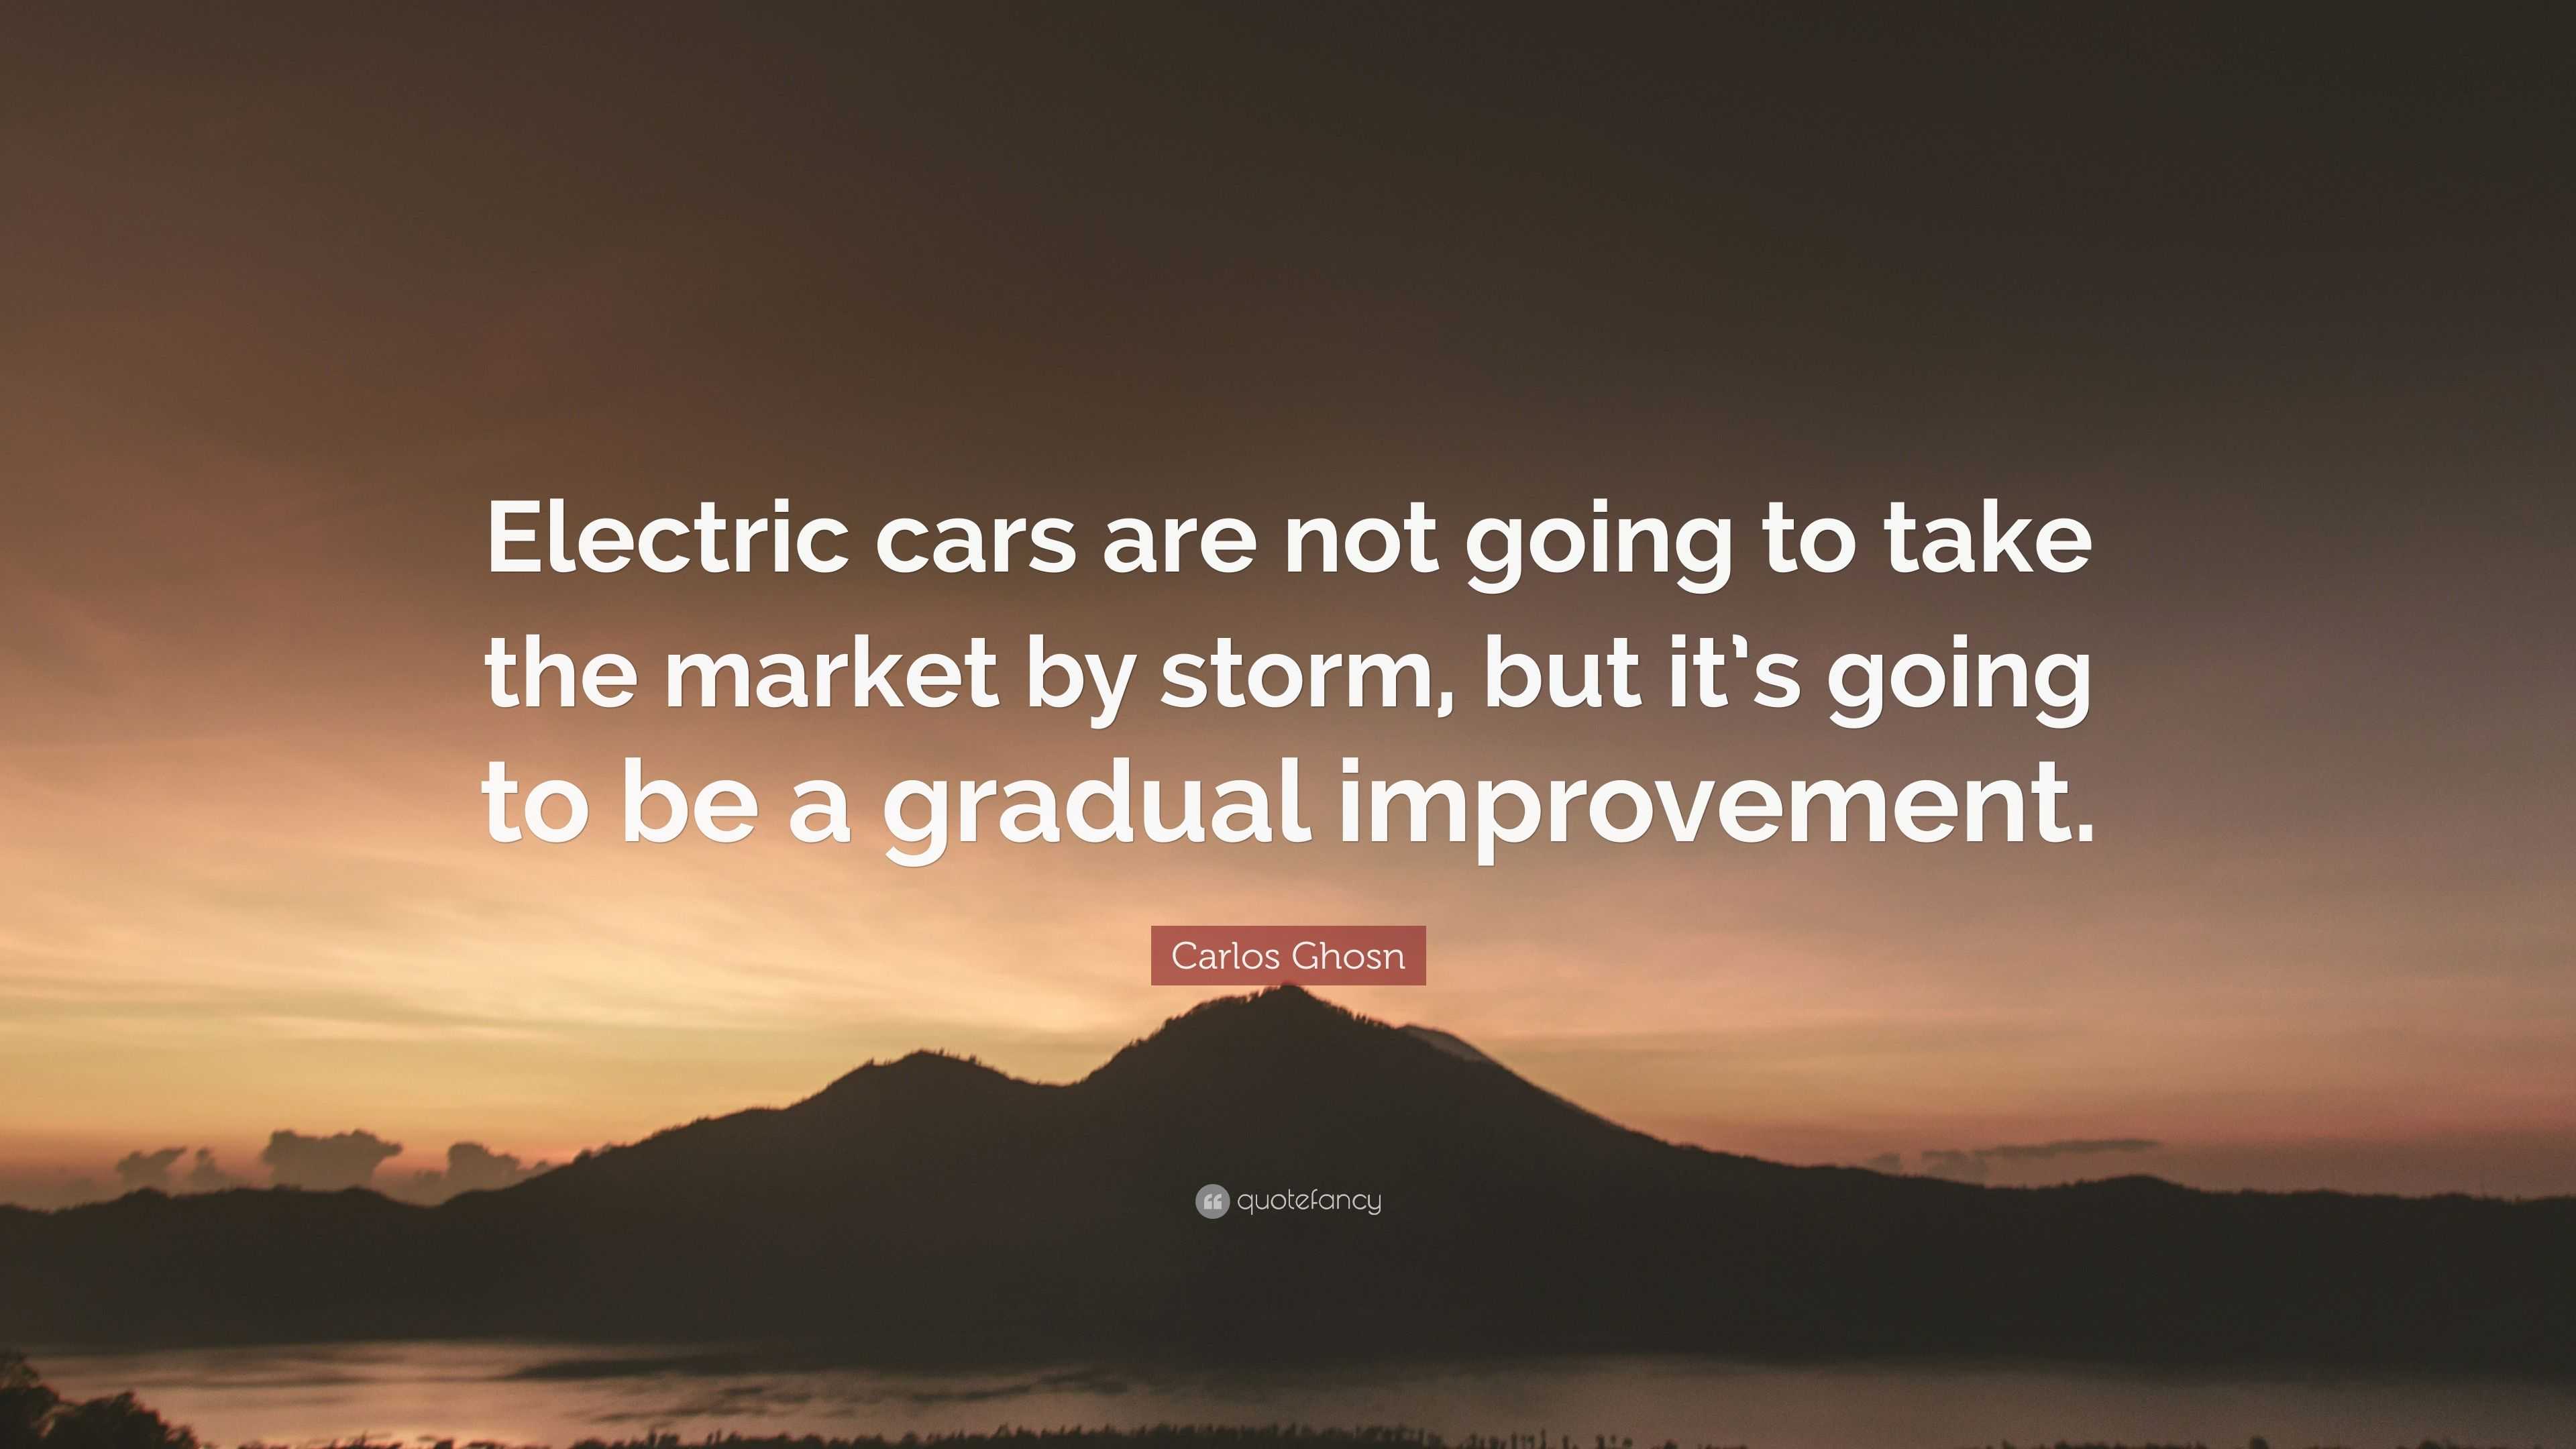 Carlos Ghosn Quote “Electric cars are not going to take the market by